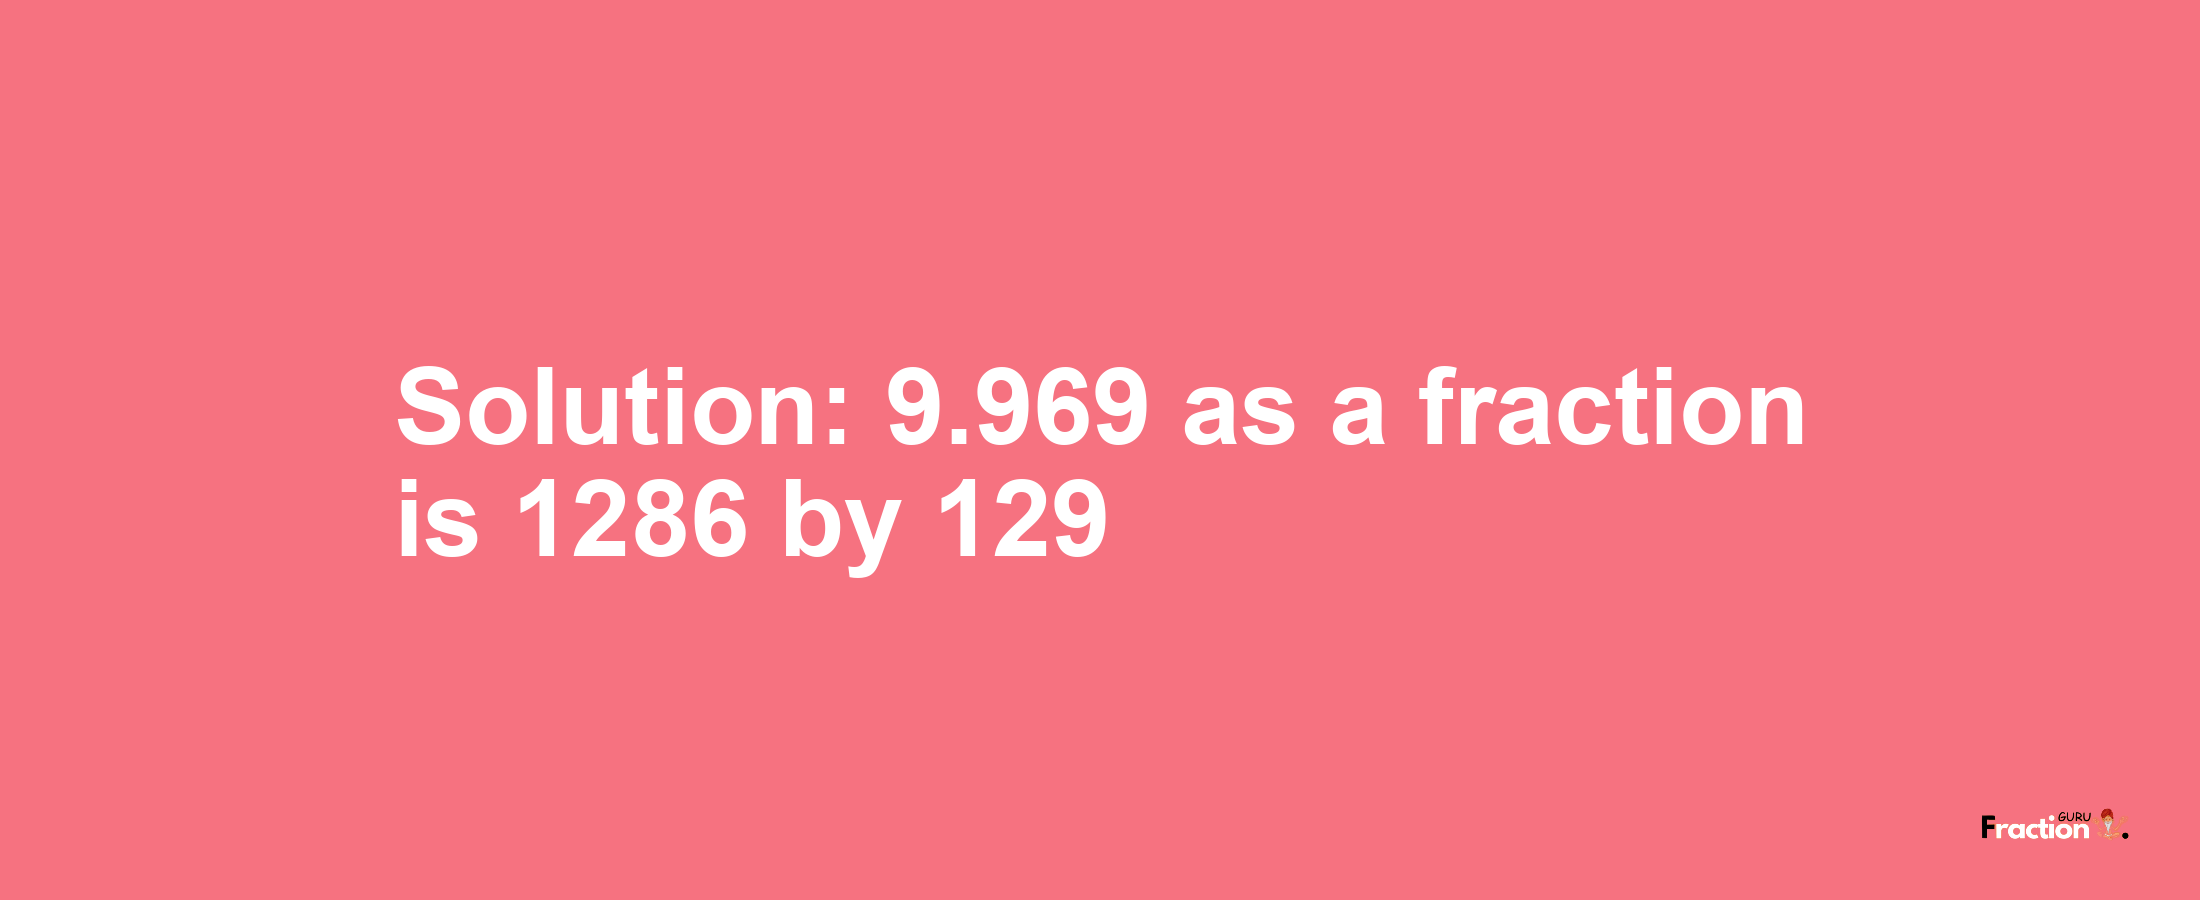 Solution:9.969 as a fraction is 1286/129